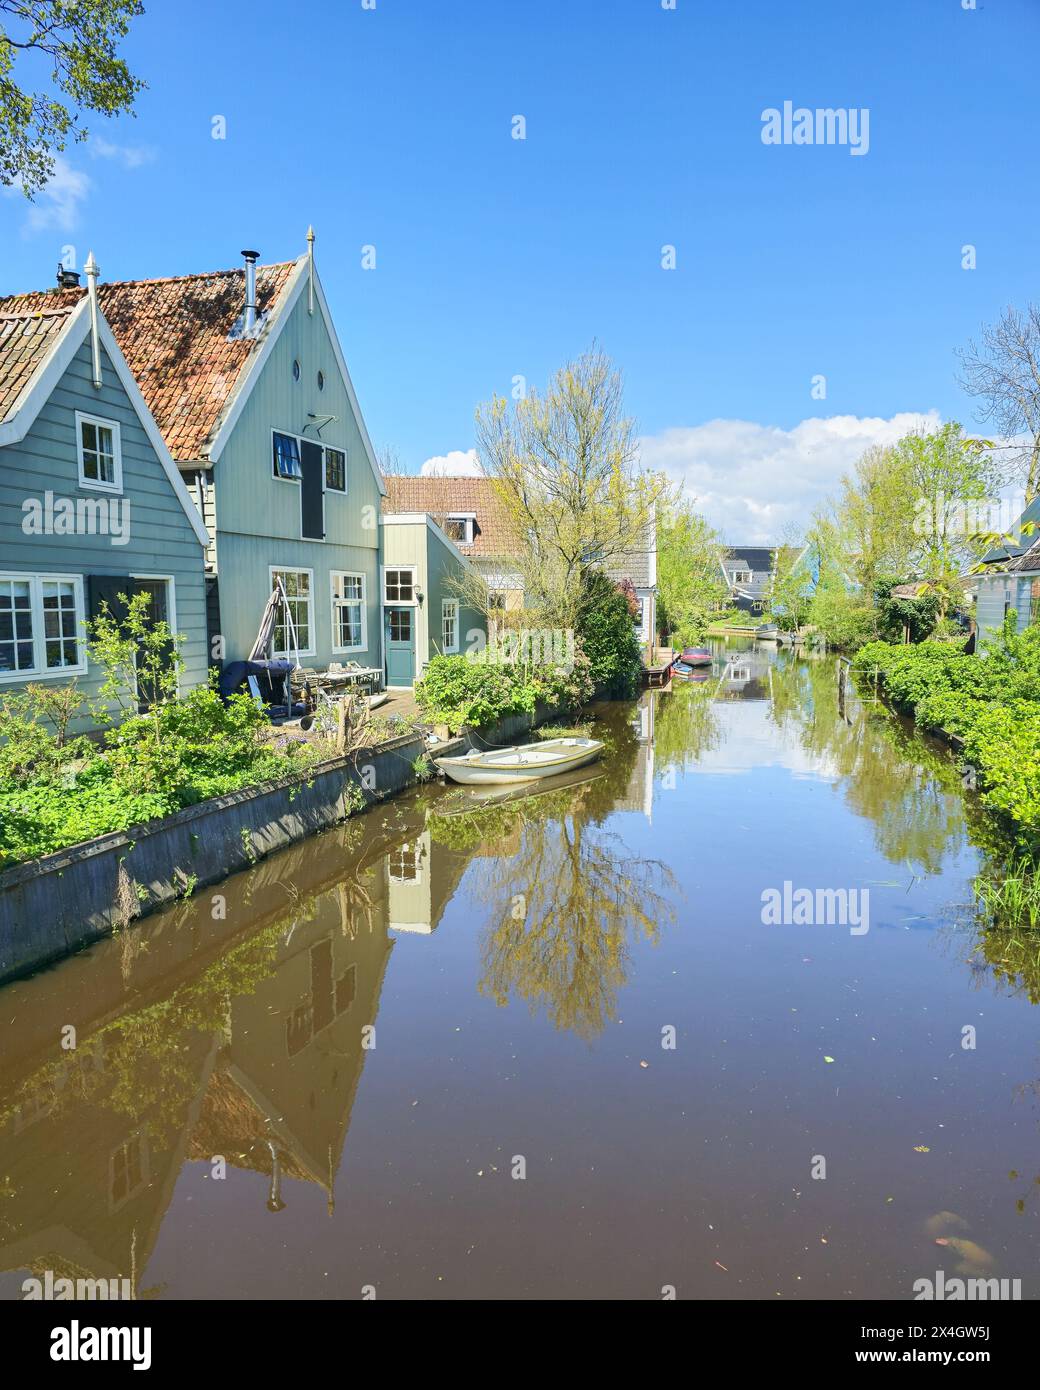 A peaceful river flows through a charming small town, surrounded by traditional houses on either side. Broek in Waterland Netherlands  Stock Photo